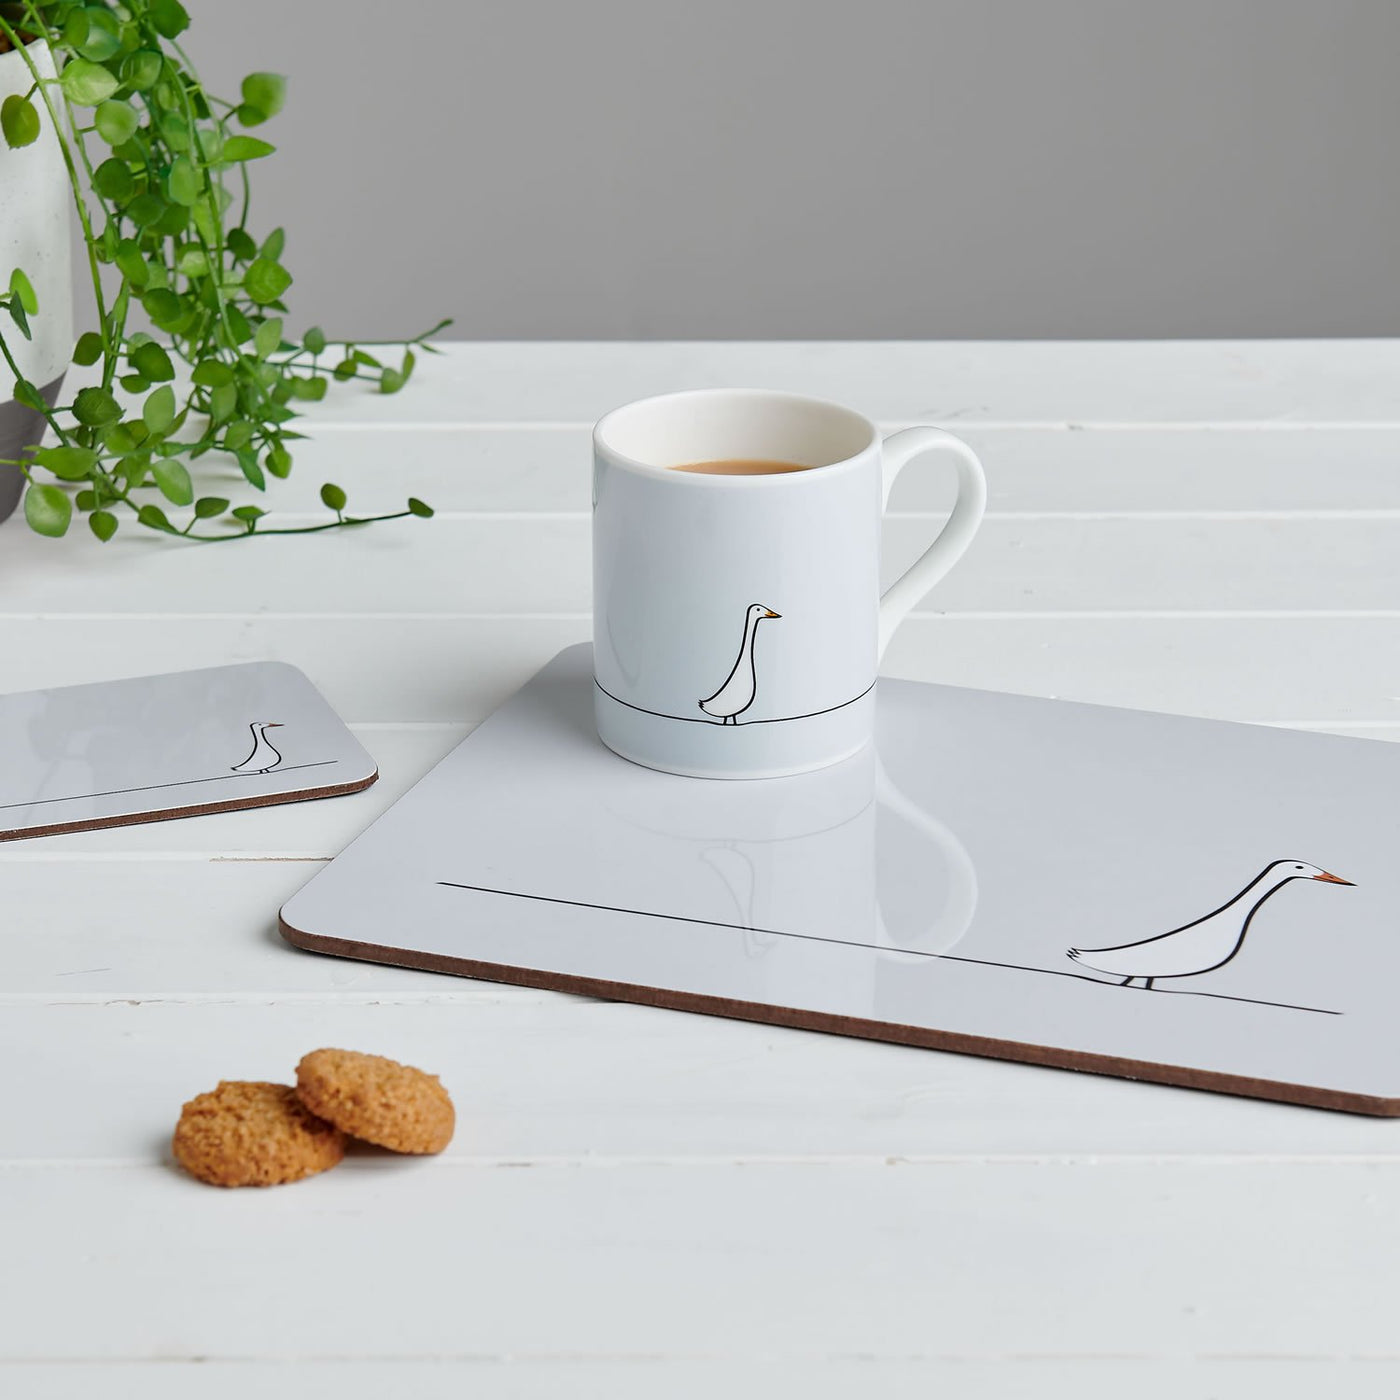 The Duck Collection including mug, placemats and coasters